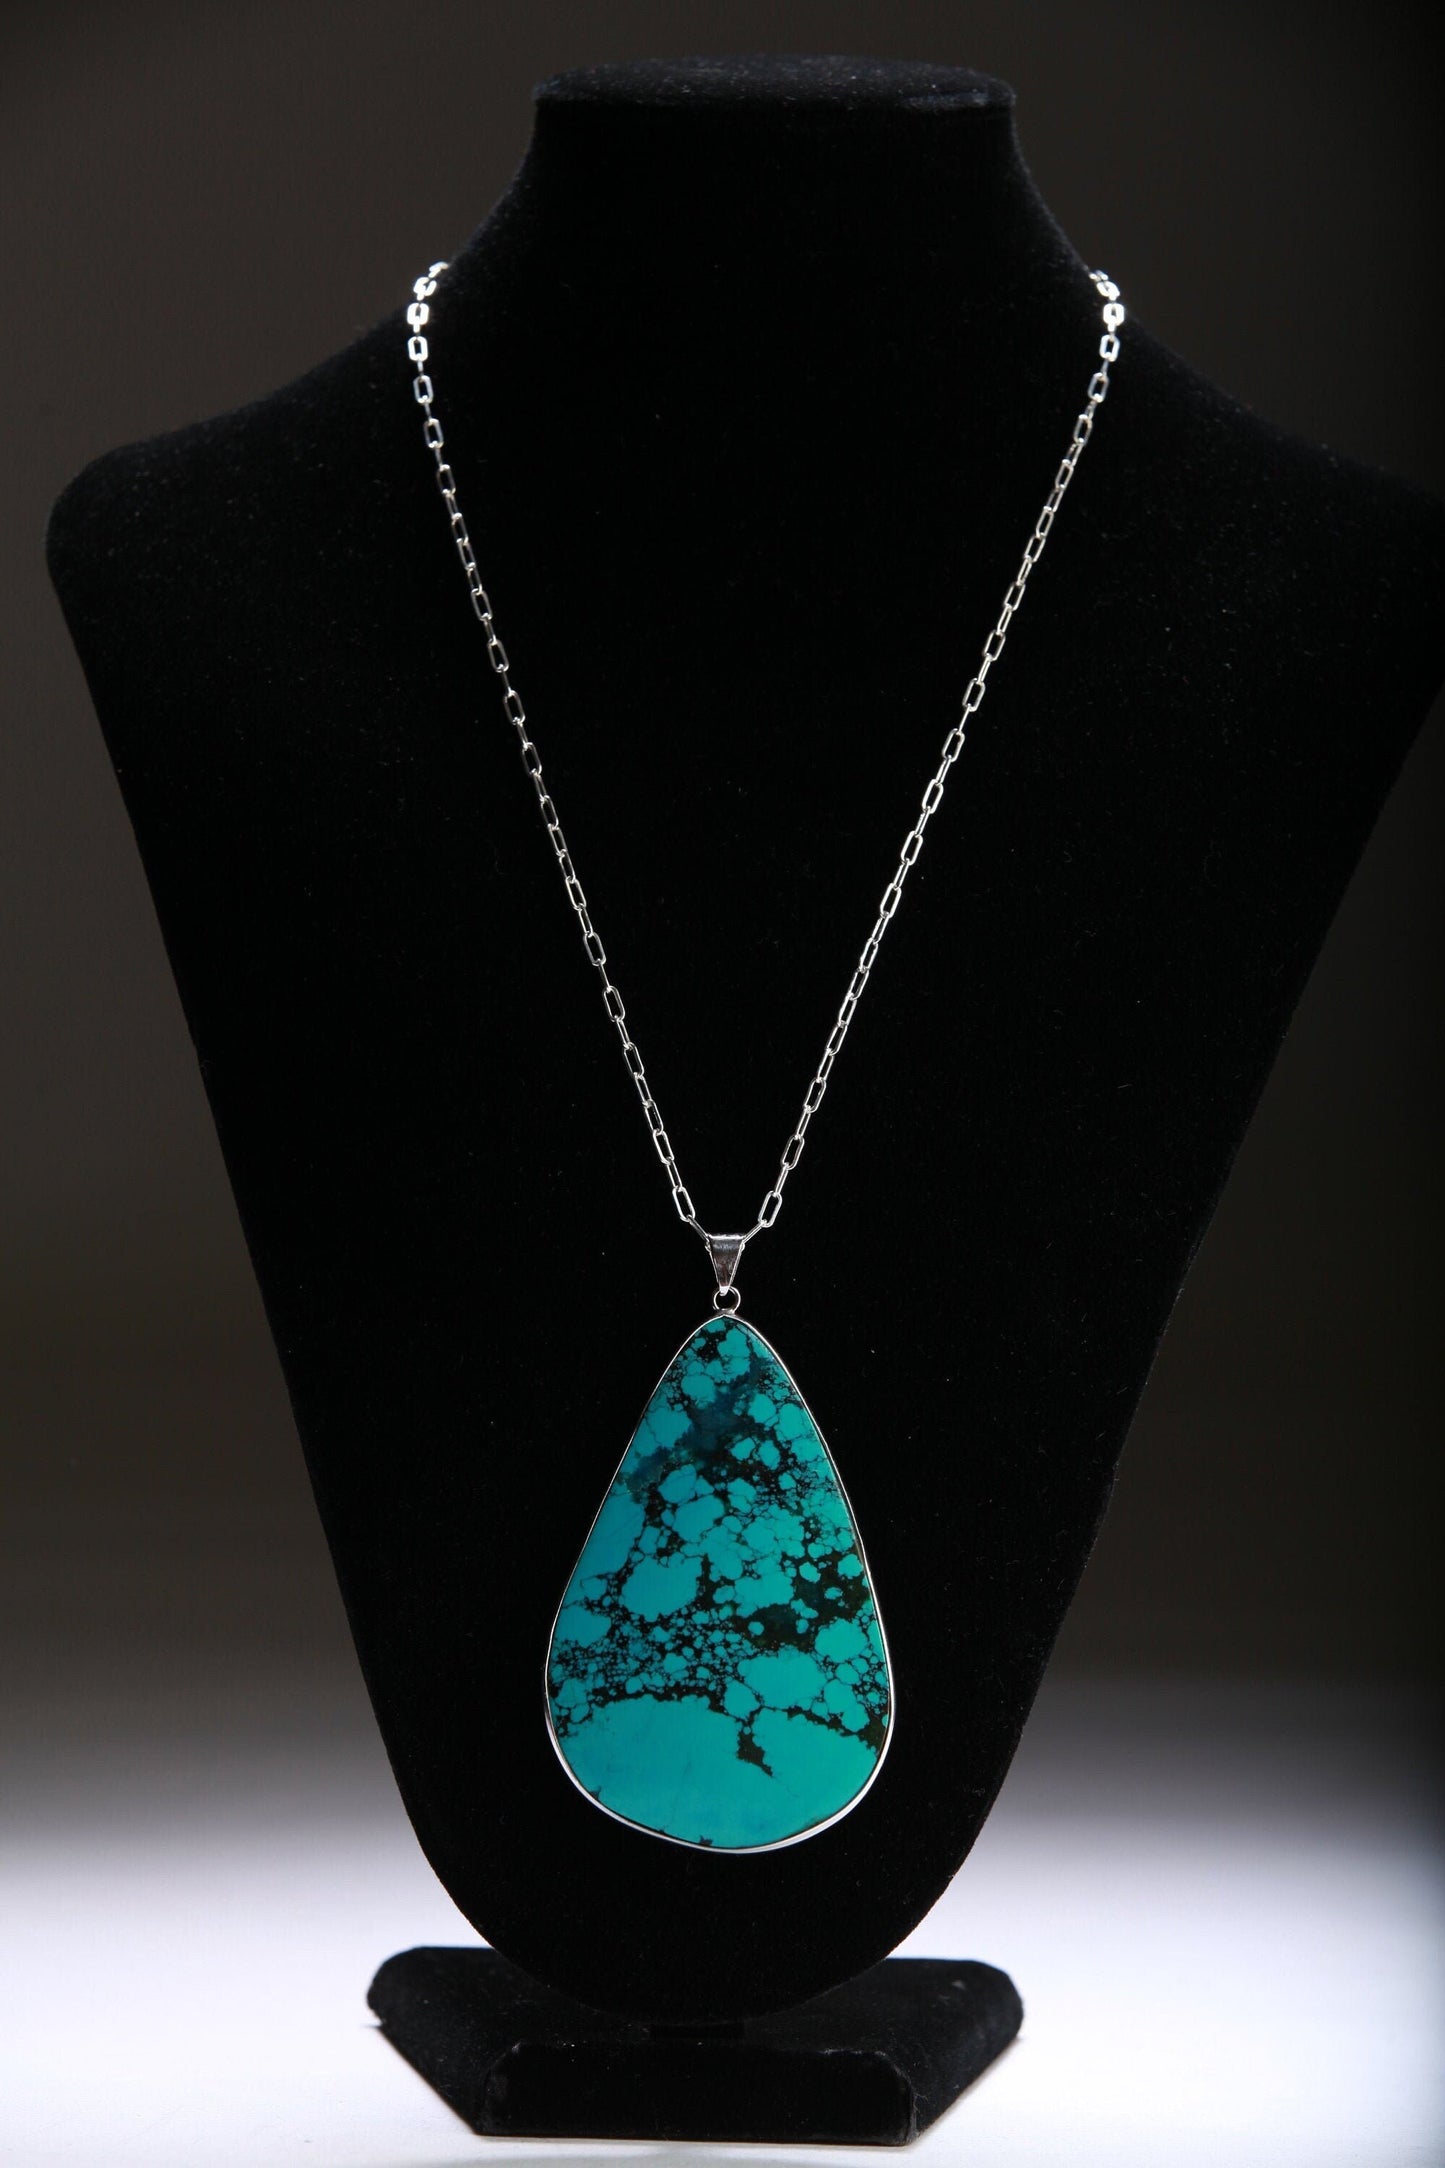 Genuine AAA Tibetan Spiderweb Turquoise Cab Gemstone 925 Sterling Silver Bezel Pendant Vintage Jewelry, Option: 925 Silver Chain,77x50mm 27g